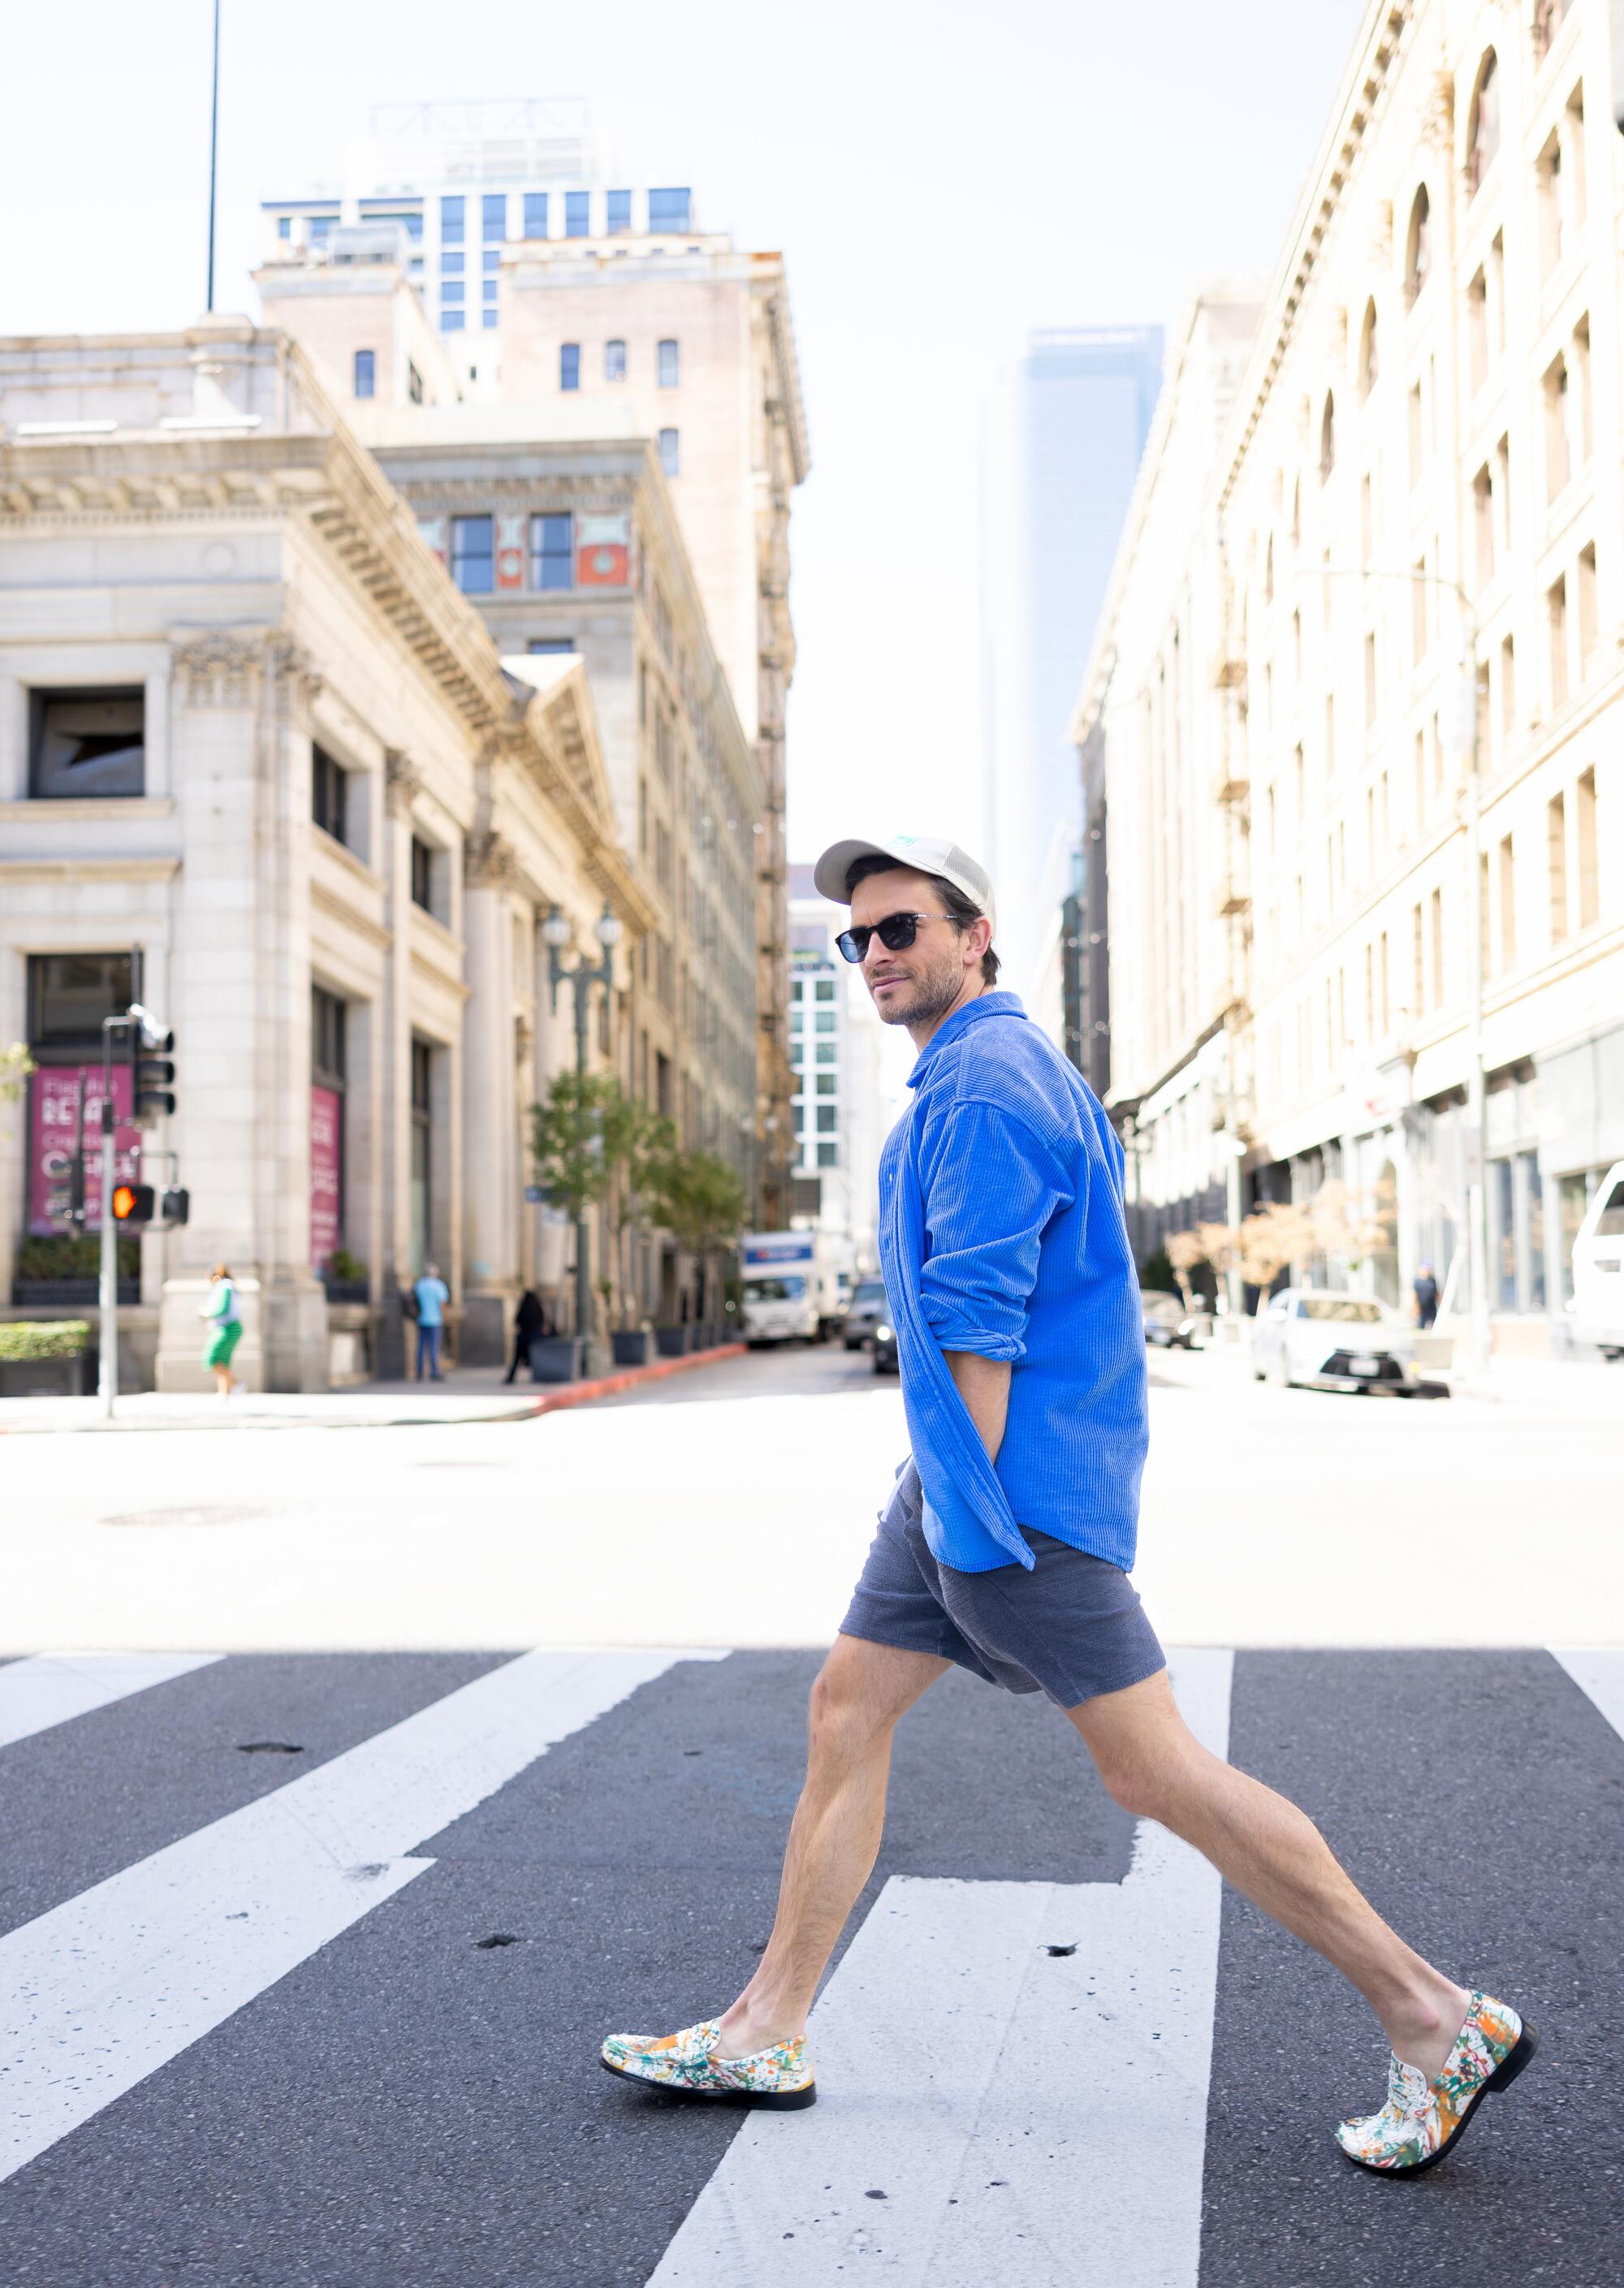 A man wearing a hat, blue T-shirt and shorts crosses a street in downtown Los Angeles.